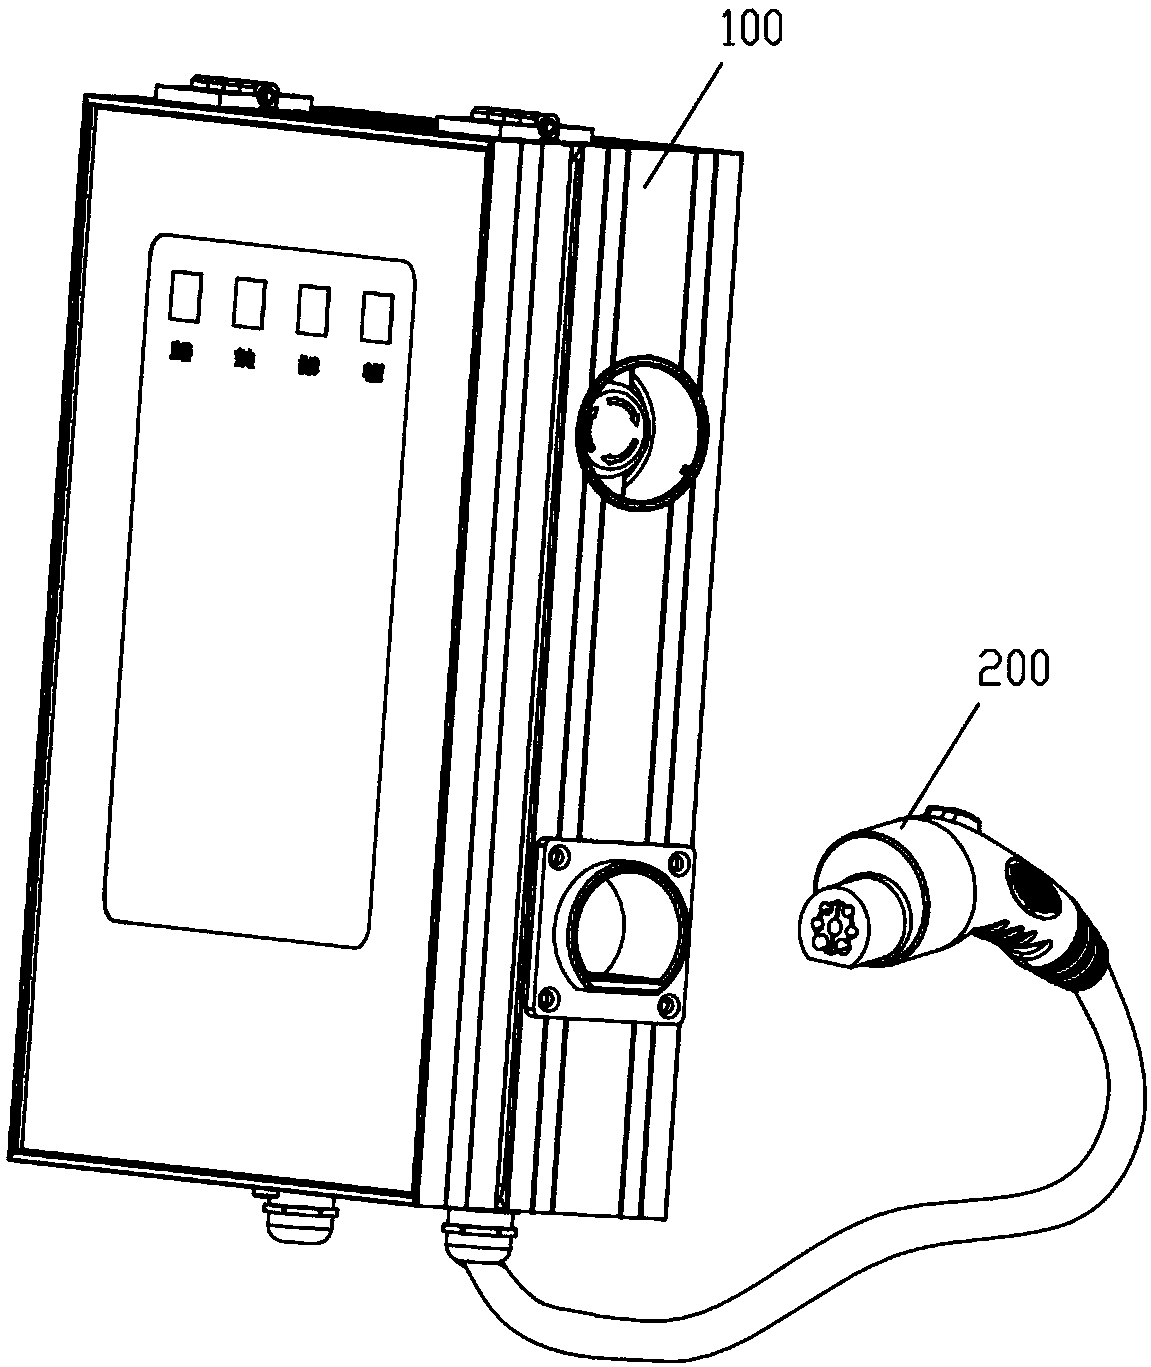 DC charging column having charging interface with automatic tripping protection